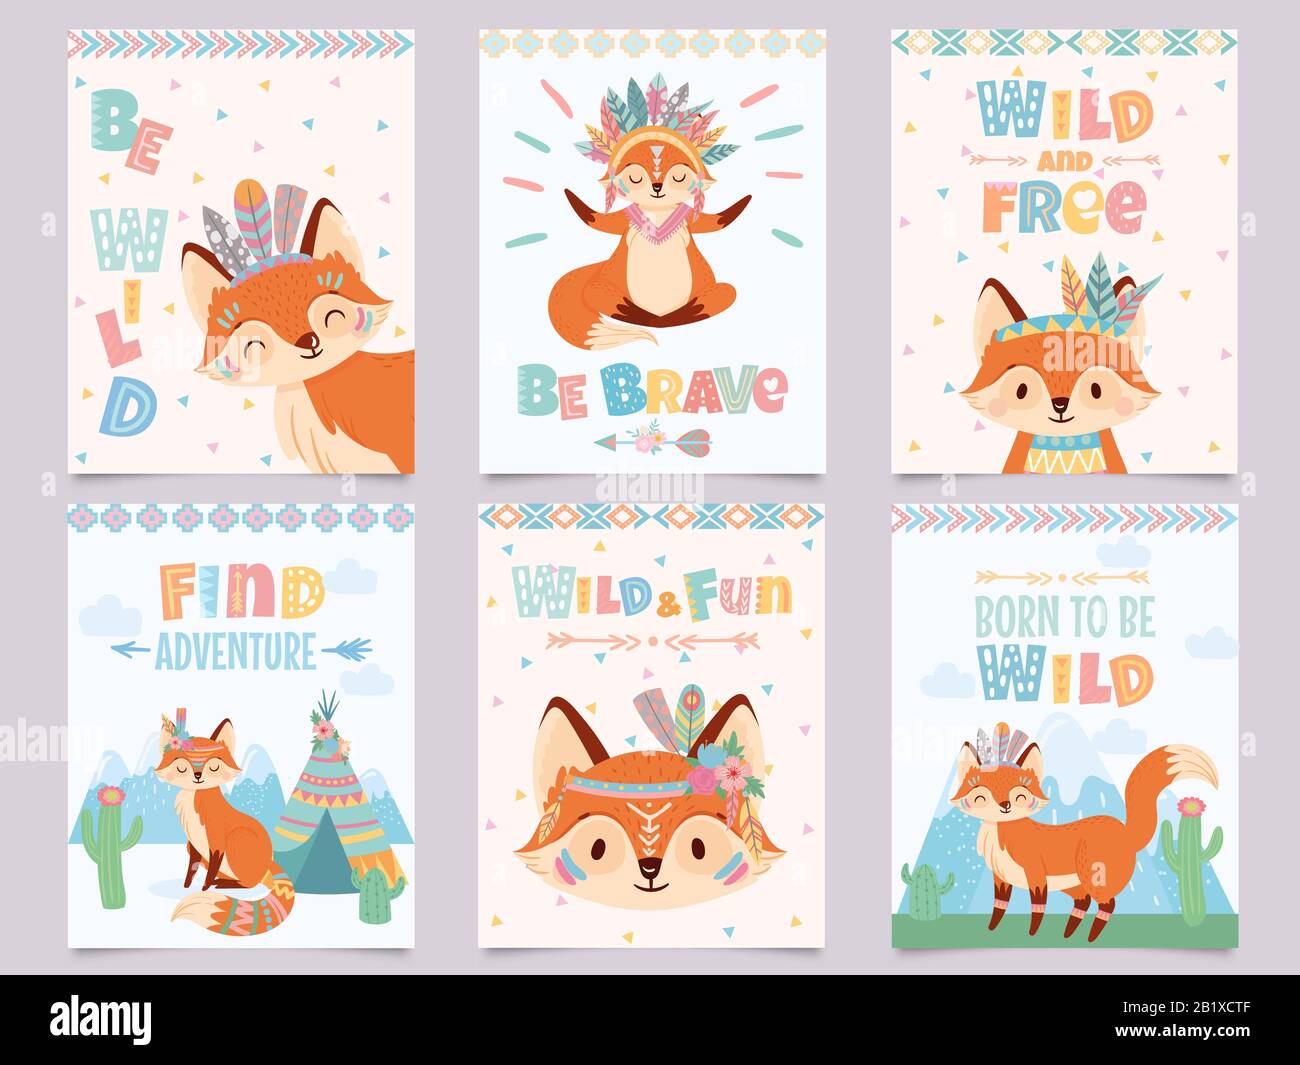 Wild tribal fox poster. Be brave, find adventure and free foxes with indian feathers and arrows cartoon posters vector illustration set Stock Vector